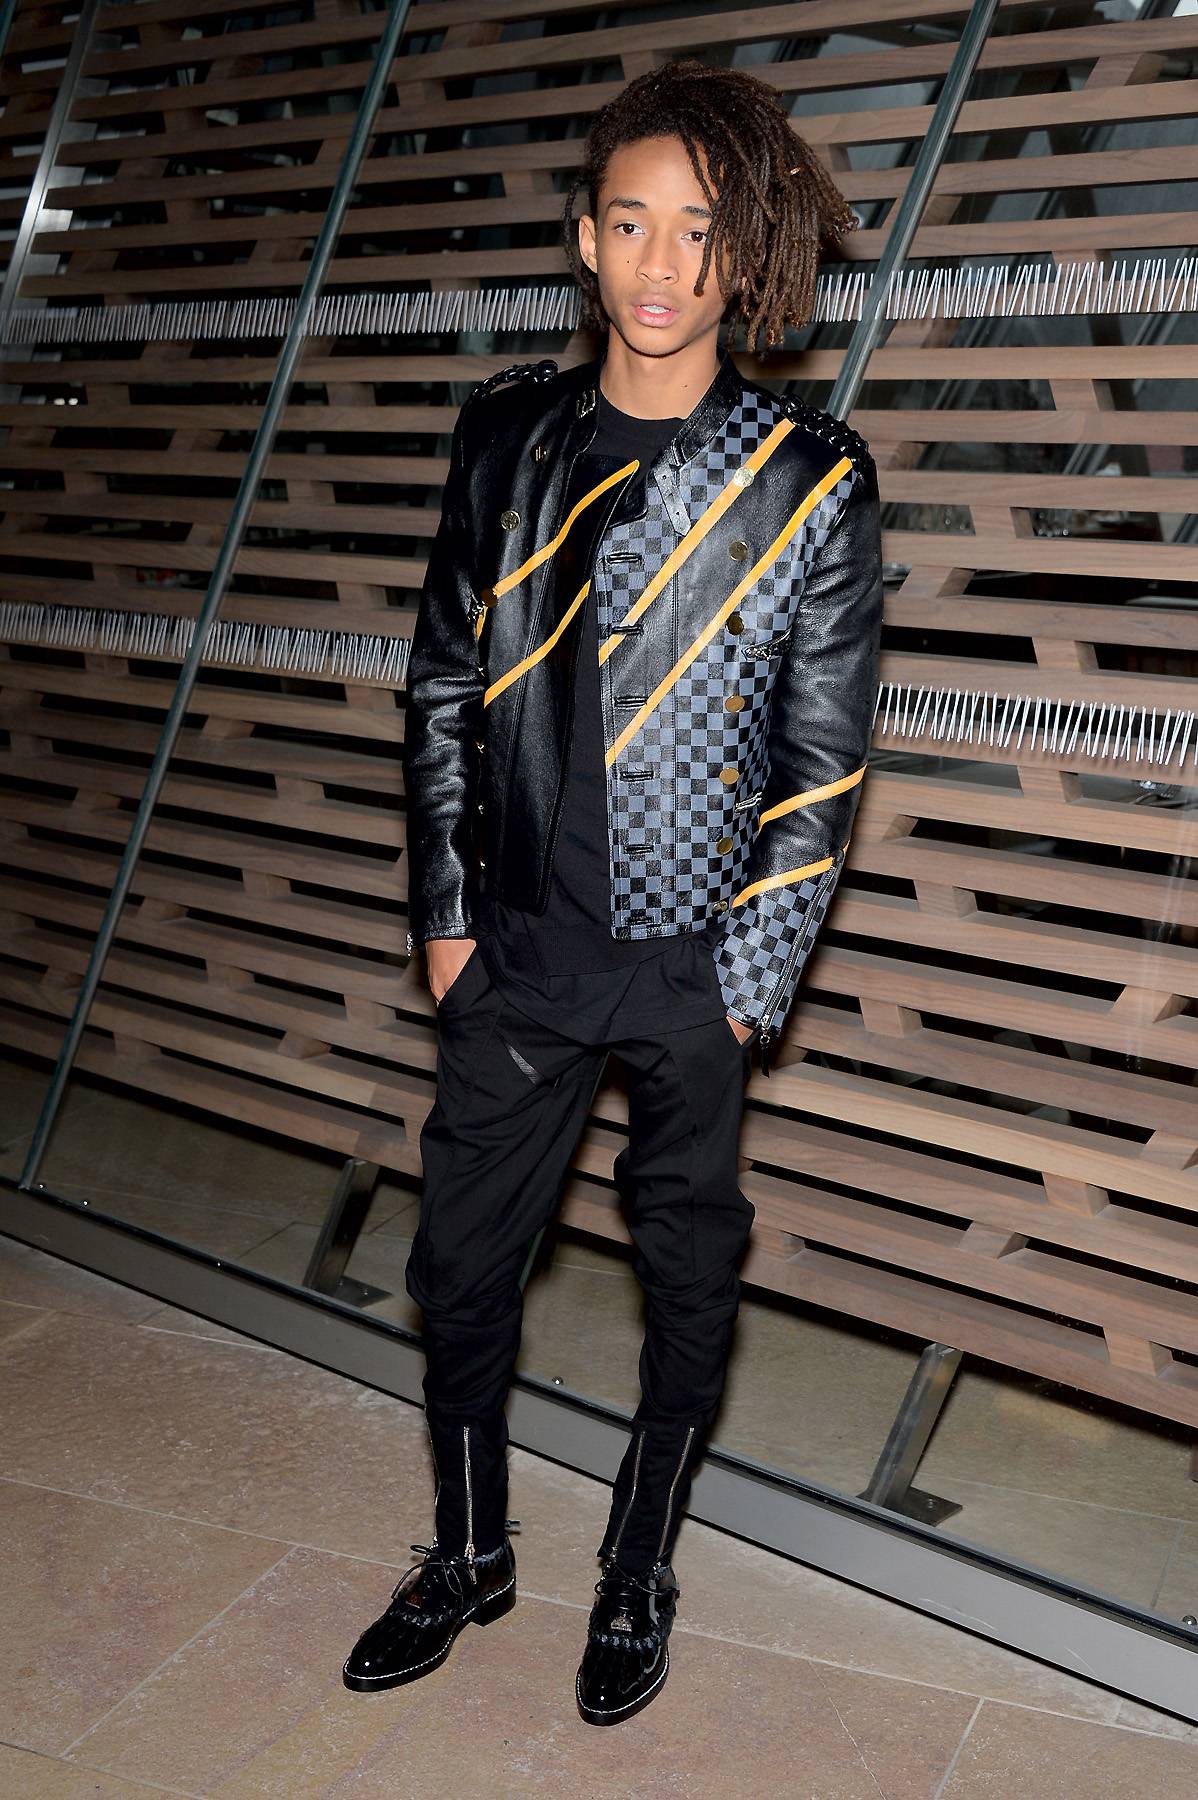 Louis Vuitton Fall/Winter 2017 Series 7 Ad Campaign Stars Jaden Smith -  Spotted Fashion